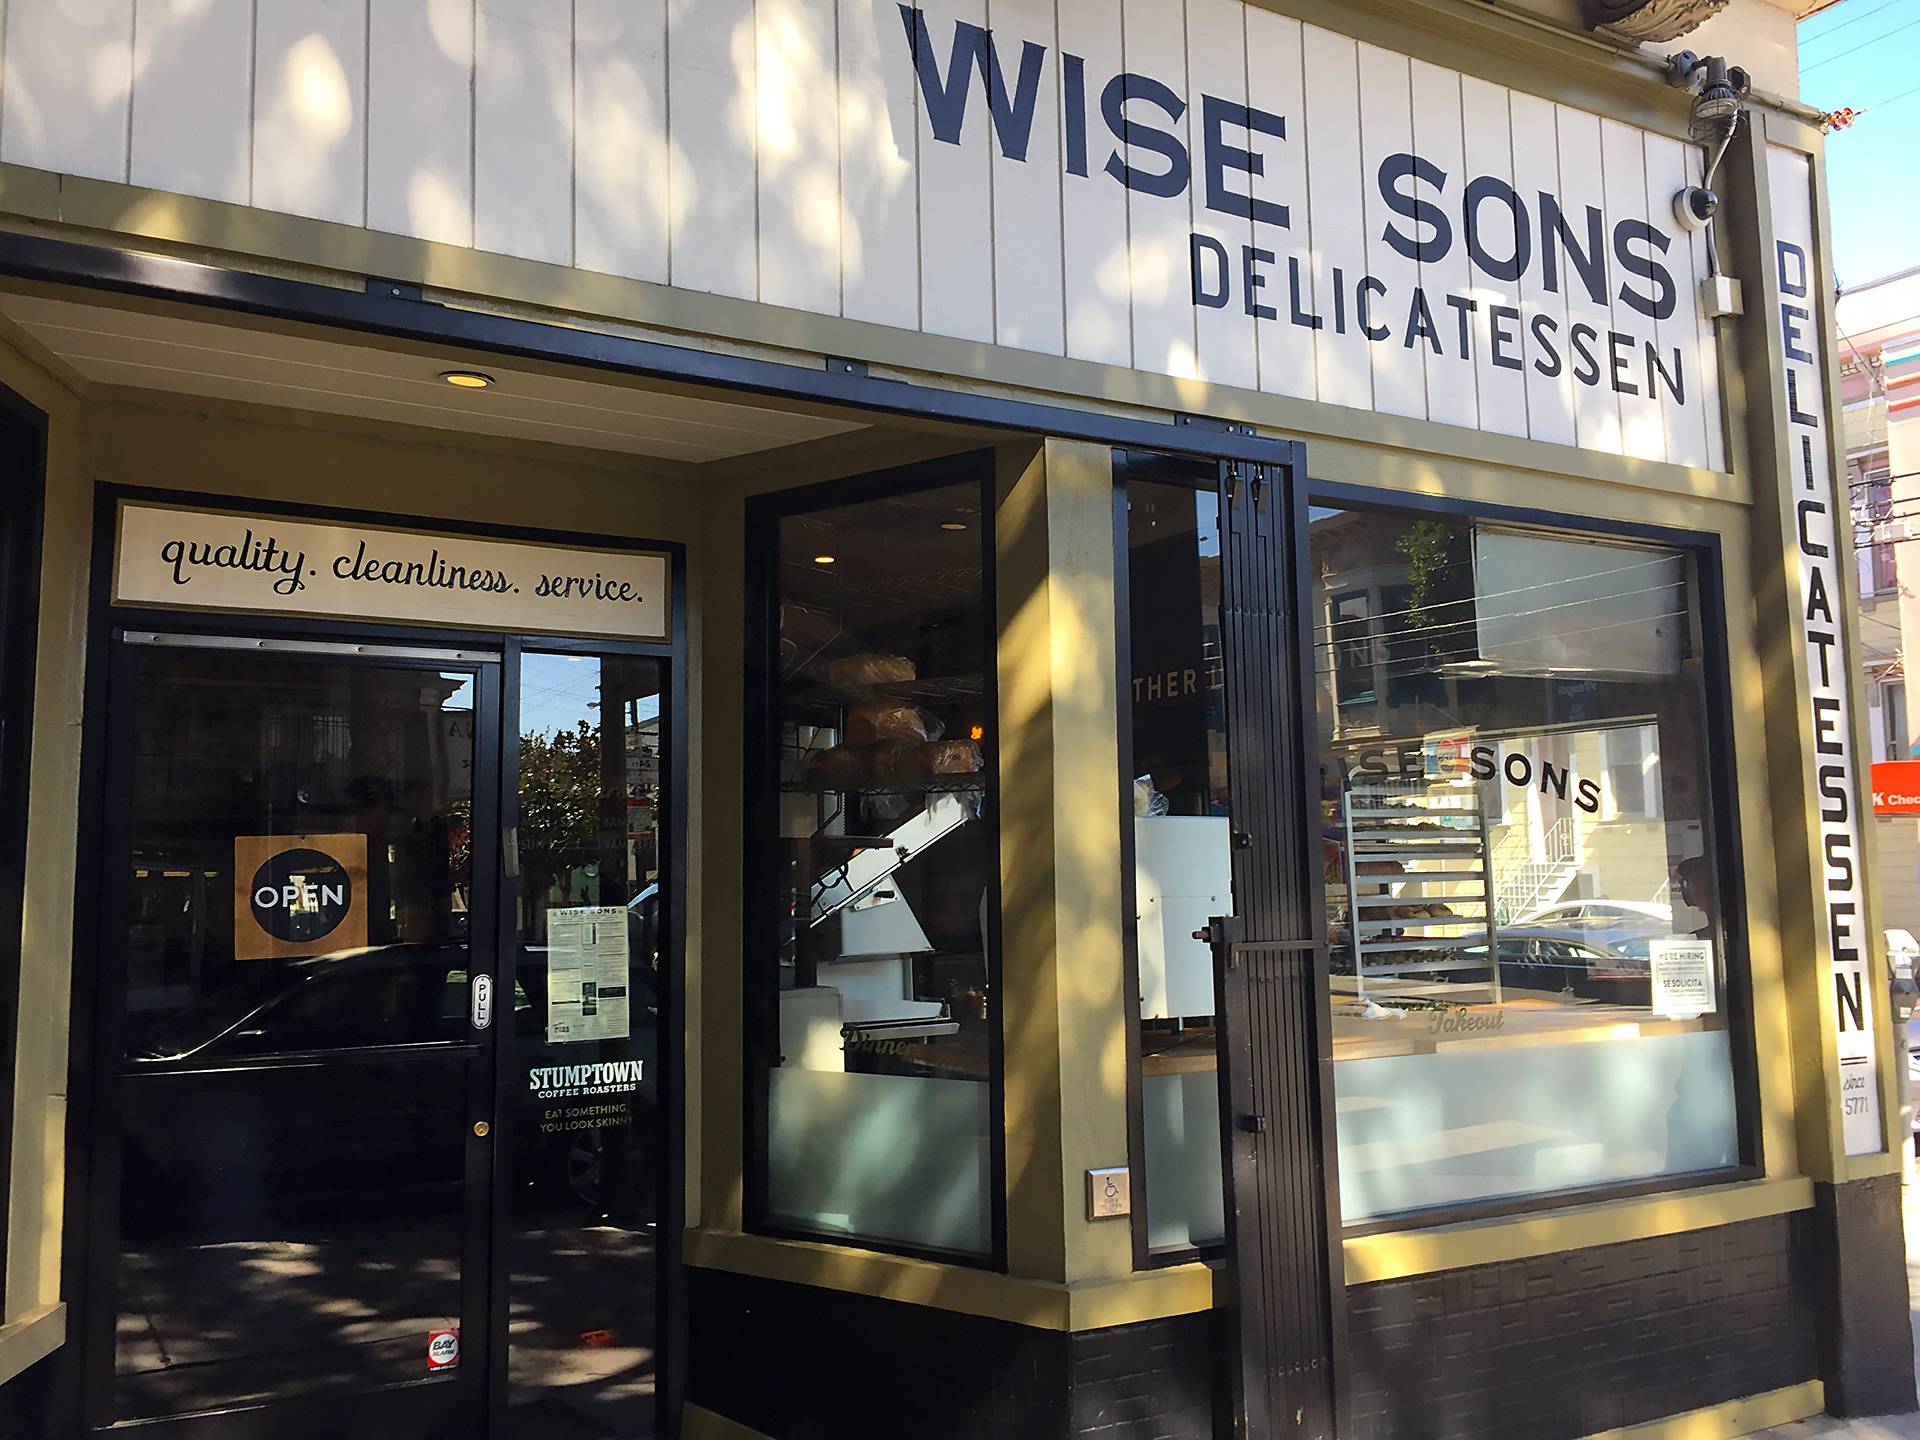 Outside WIse Sons Deli on 24th Street.